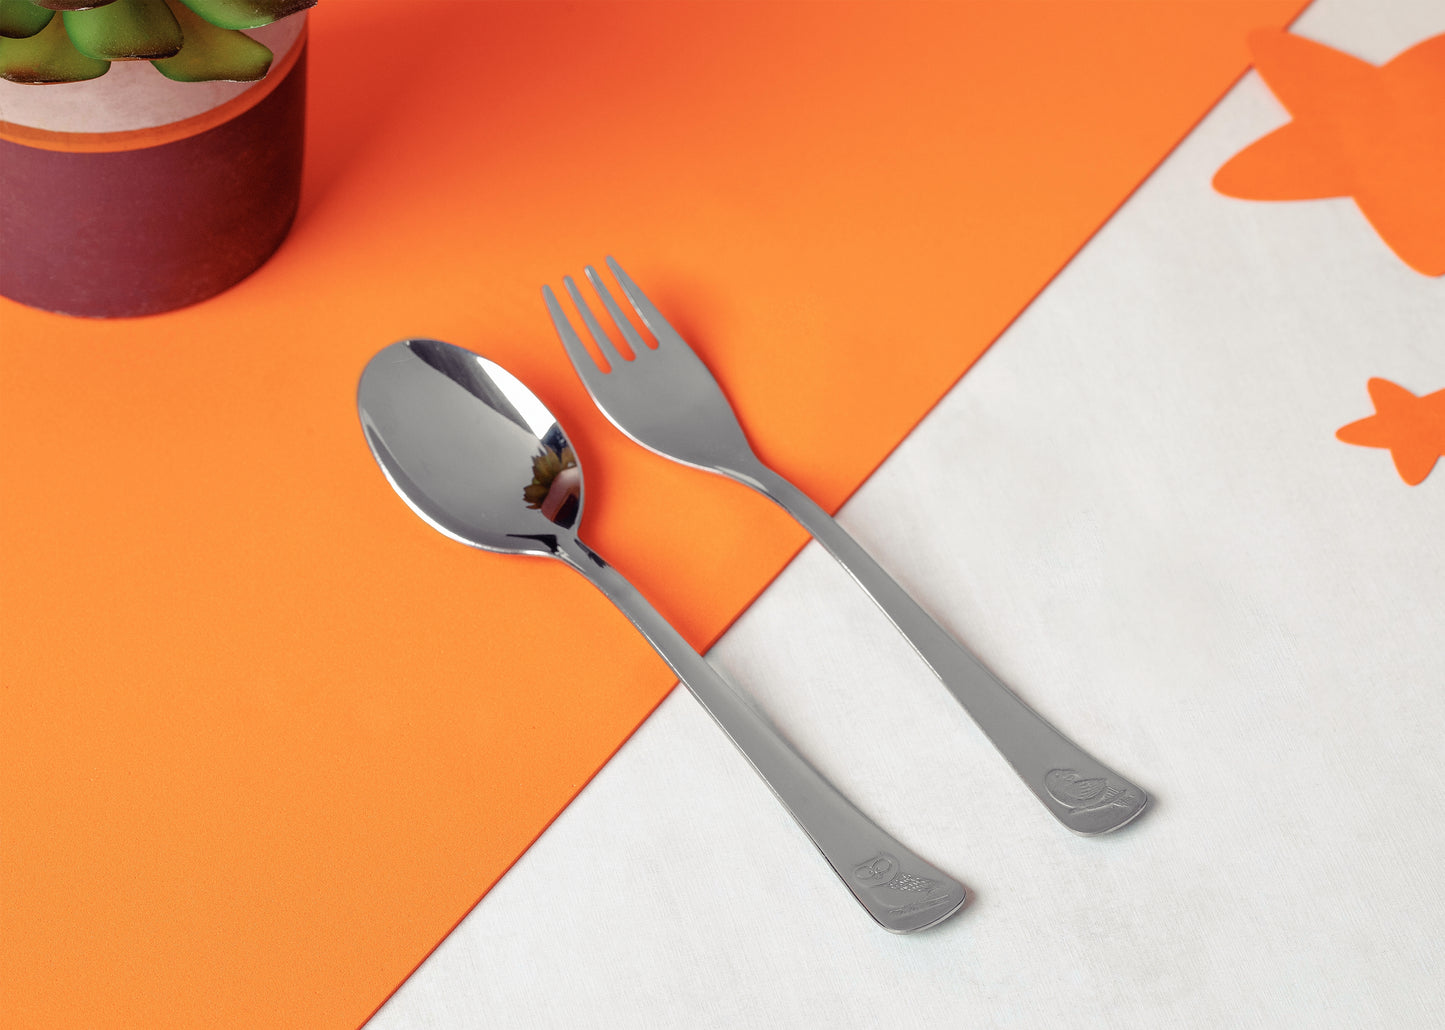 2pc. Child's Set, Stainless Steel. Fork and Spoon